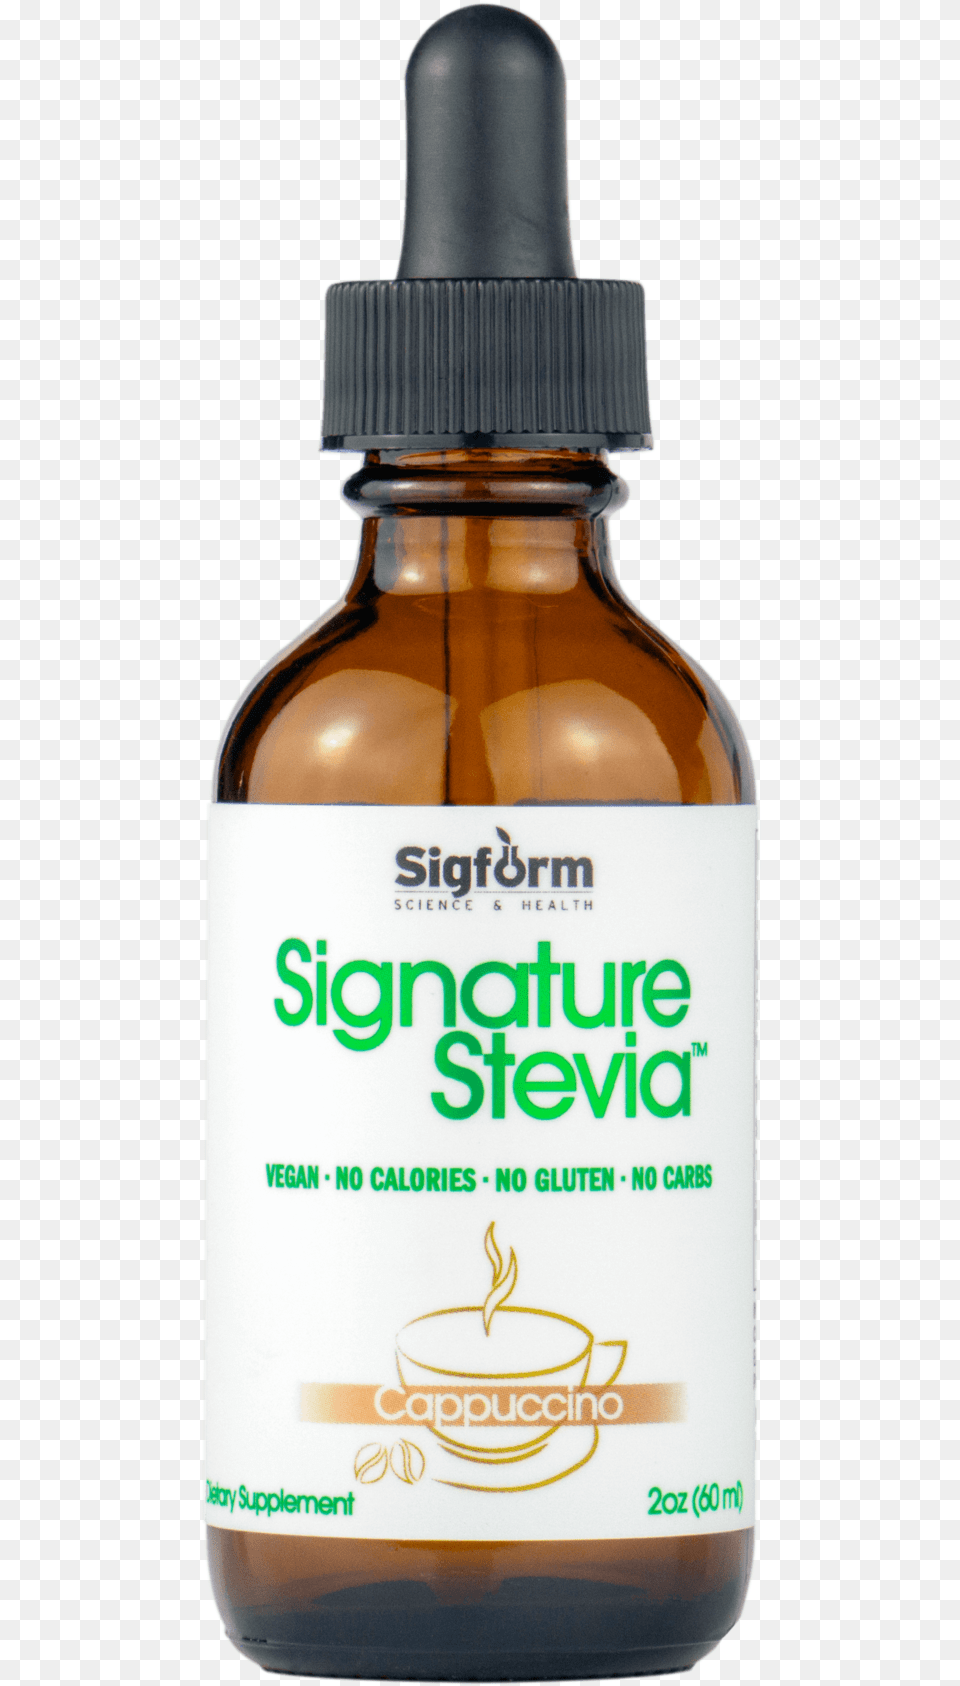 Cappuccino Flavored Stevia Drops Skinceuticals Blemish Age Defense, Bottle, Lotion, Herbal, Herbs Free Png Download